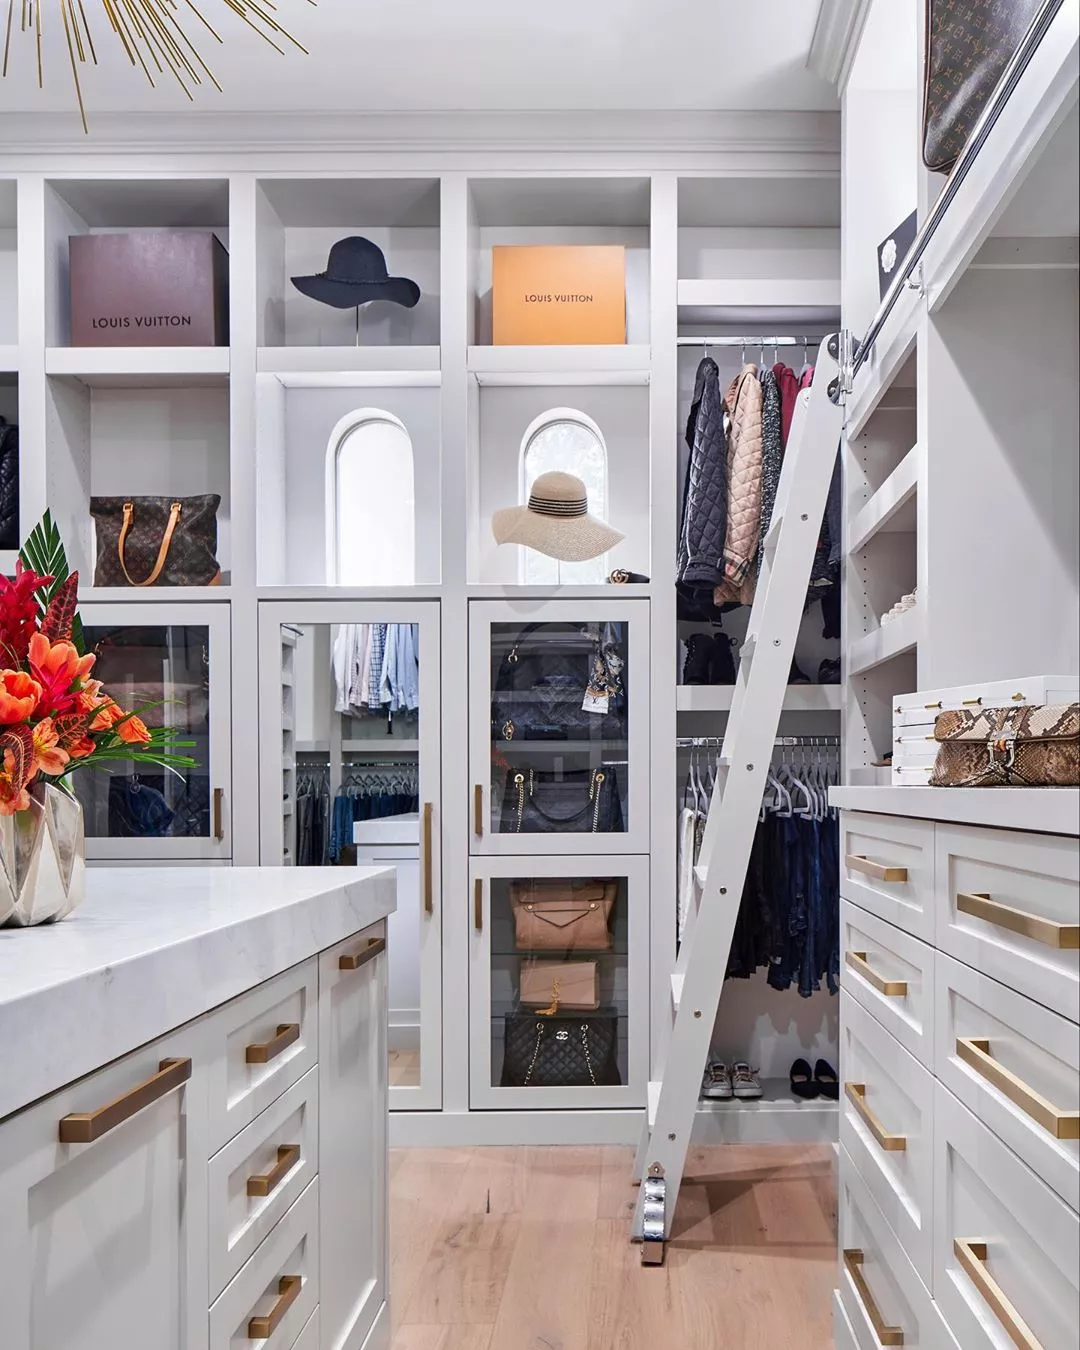 Your Luxury Closet: Over the Top Ideas for The Closet of Your Dreams